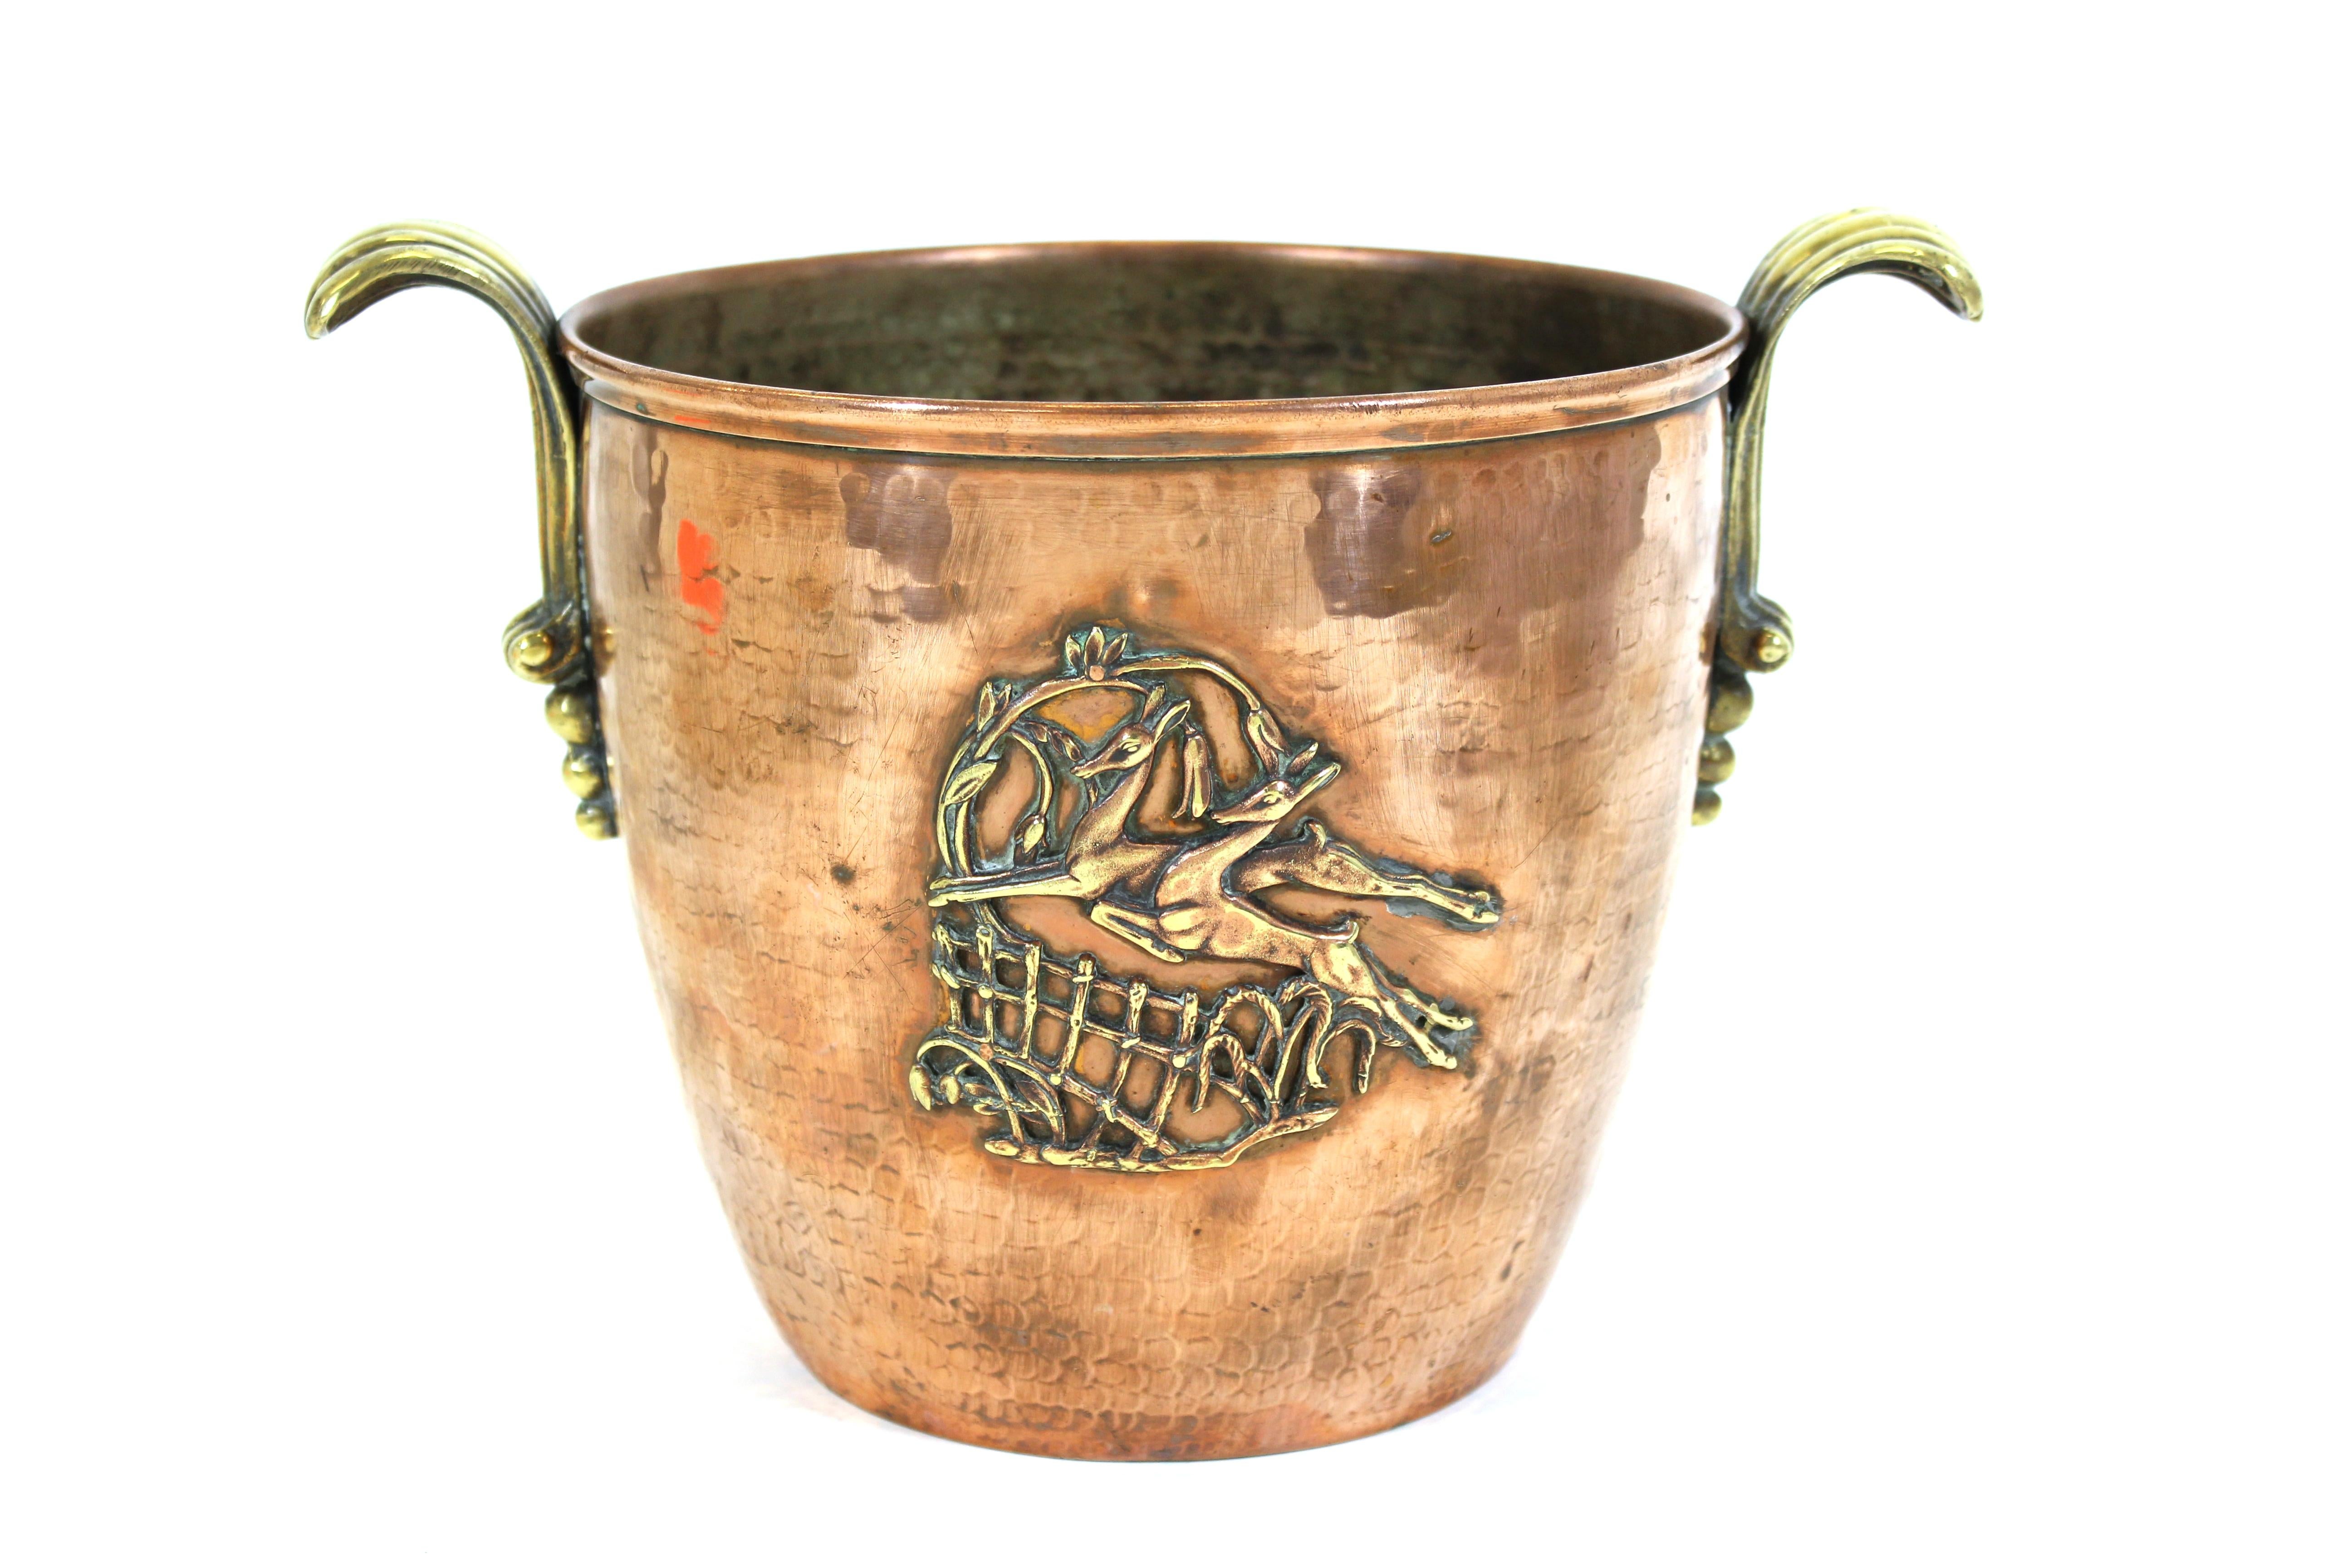 Austrian Art Deco copper and brass champagne or wine bucket with gazelle decoration on both sides and elegant brass handles. In great vintage condition with age-appropriate wear.